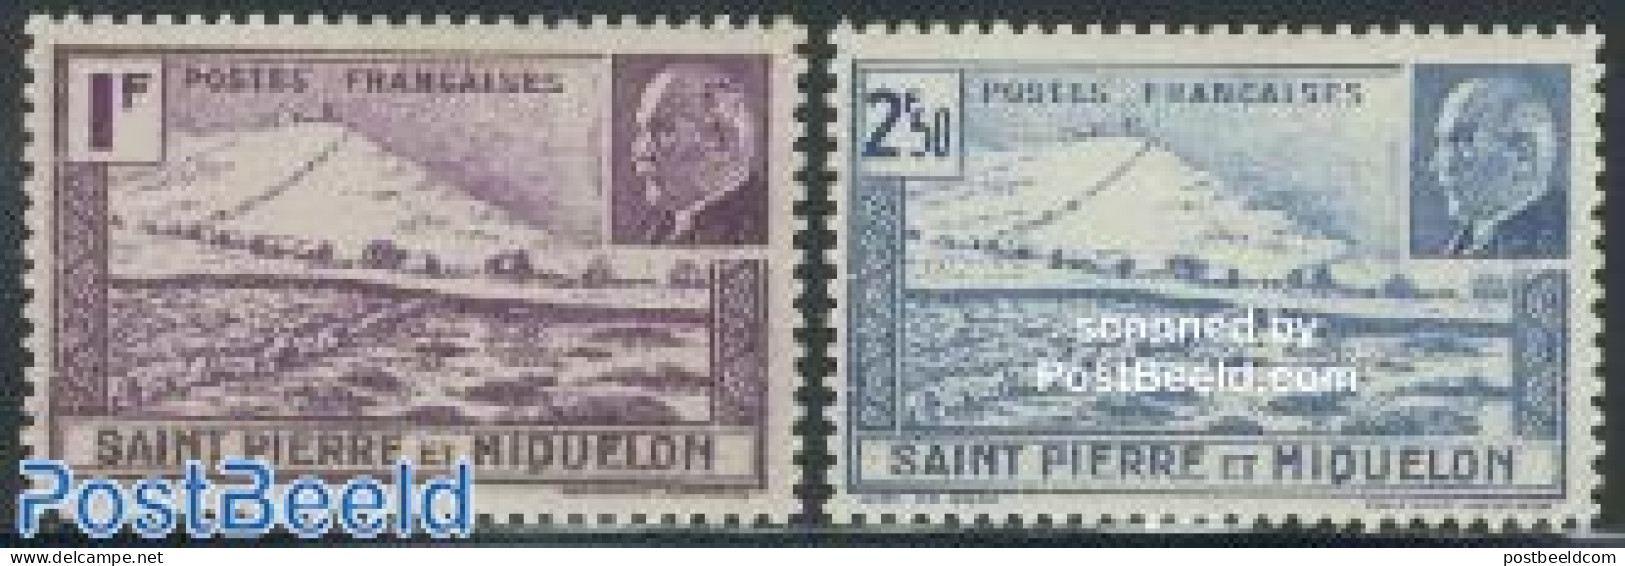 Saint Pierre And Miquelon 1941 Petain 2v, Mint NH, Various - Lighthouses & Safety At Sea - Faros